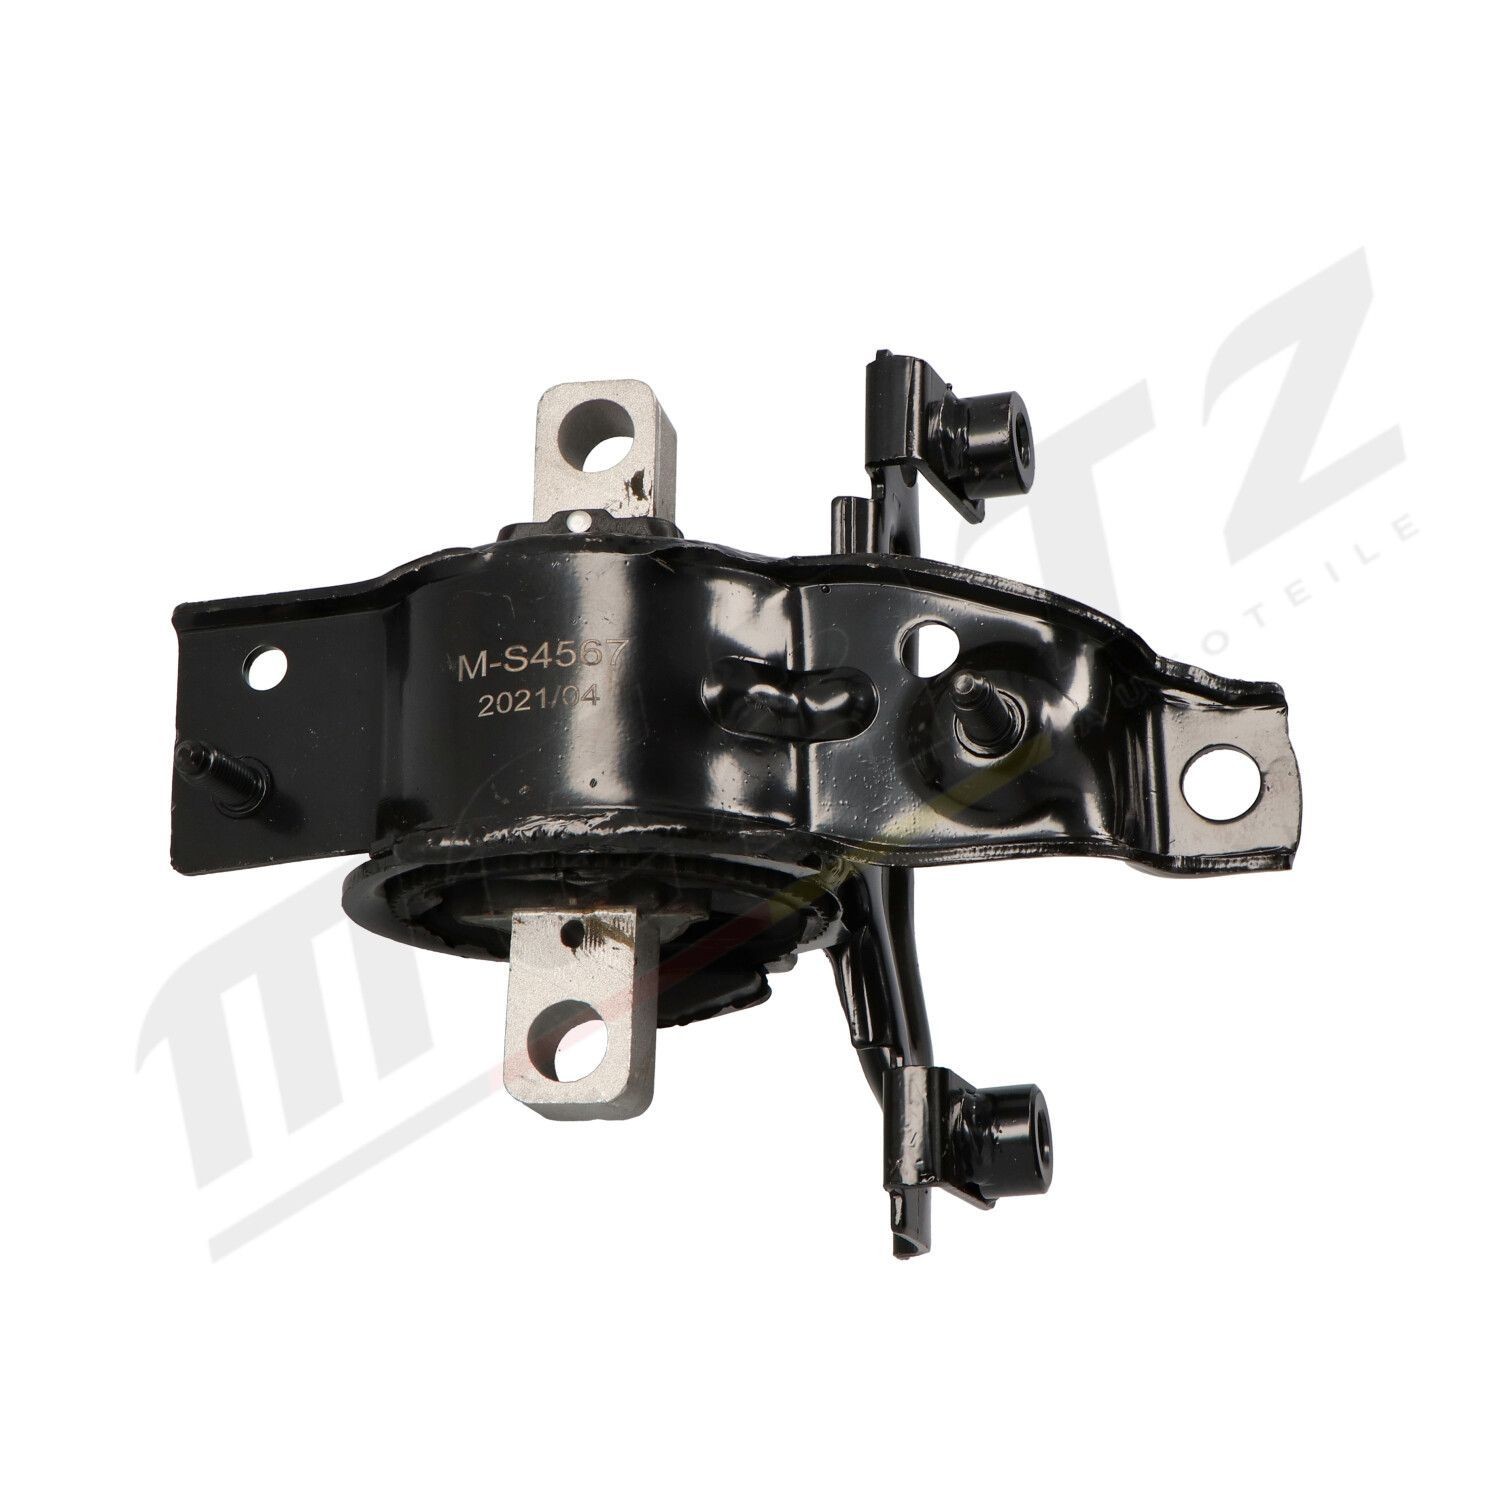 MERTZ Motor mount rear and front Polo 6R new M-S4567